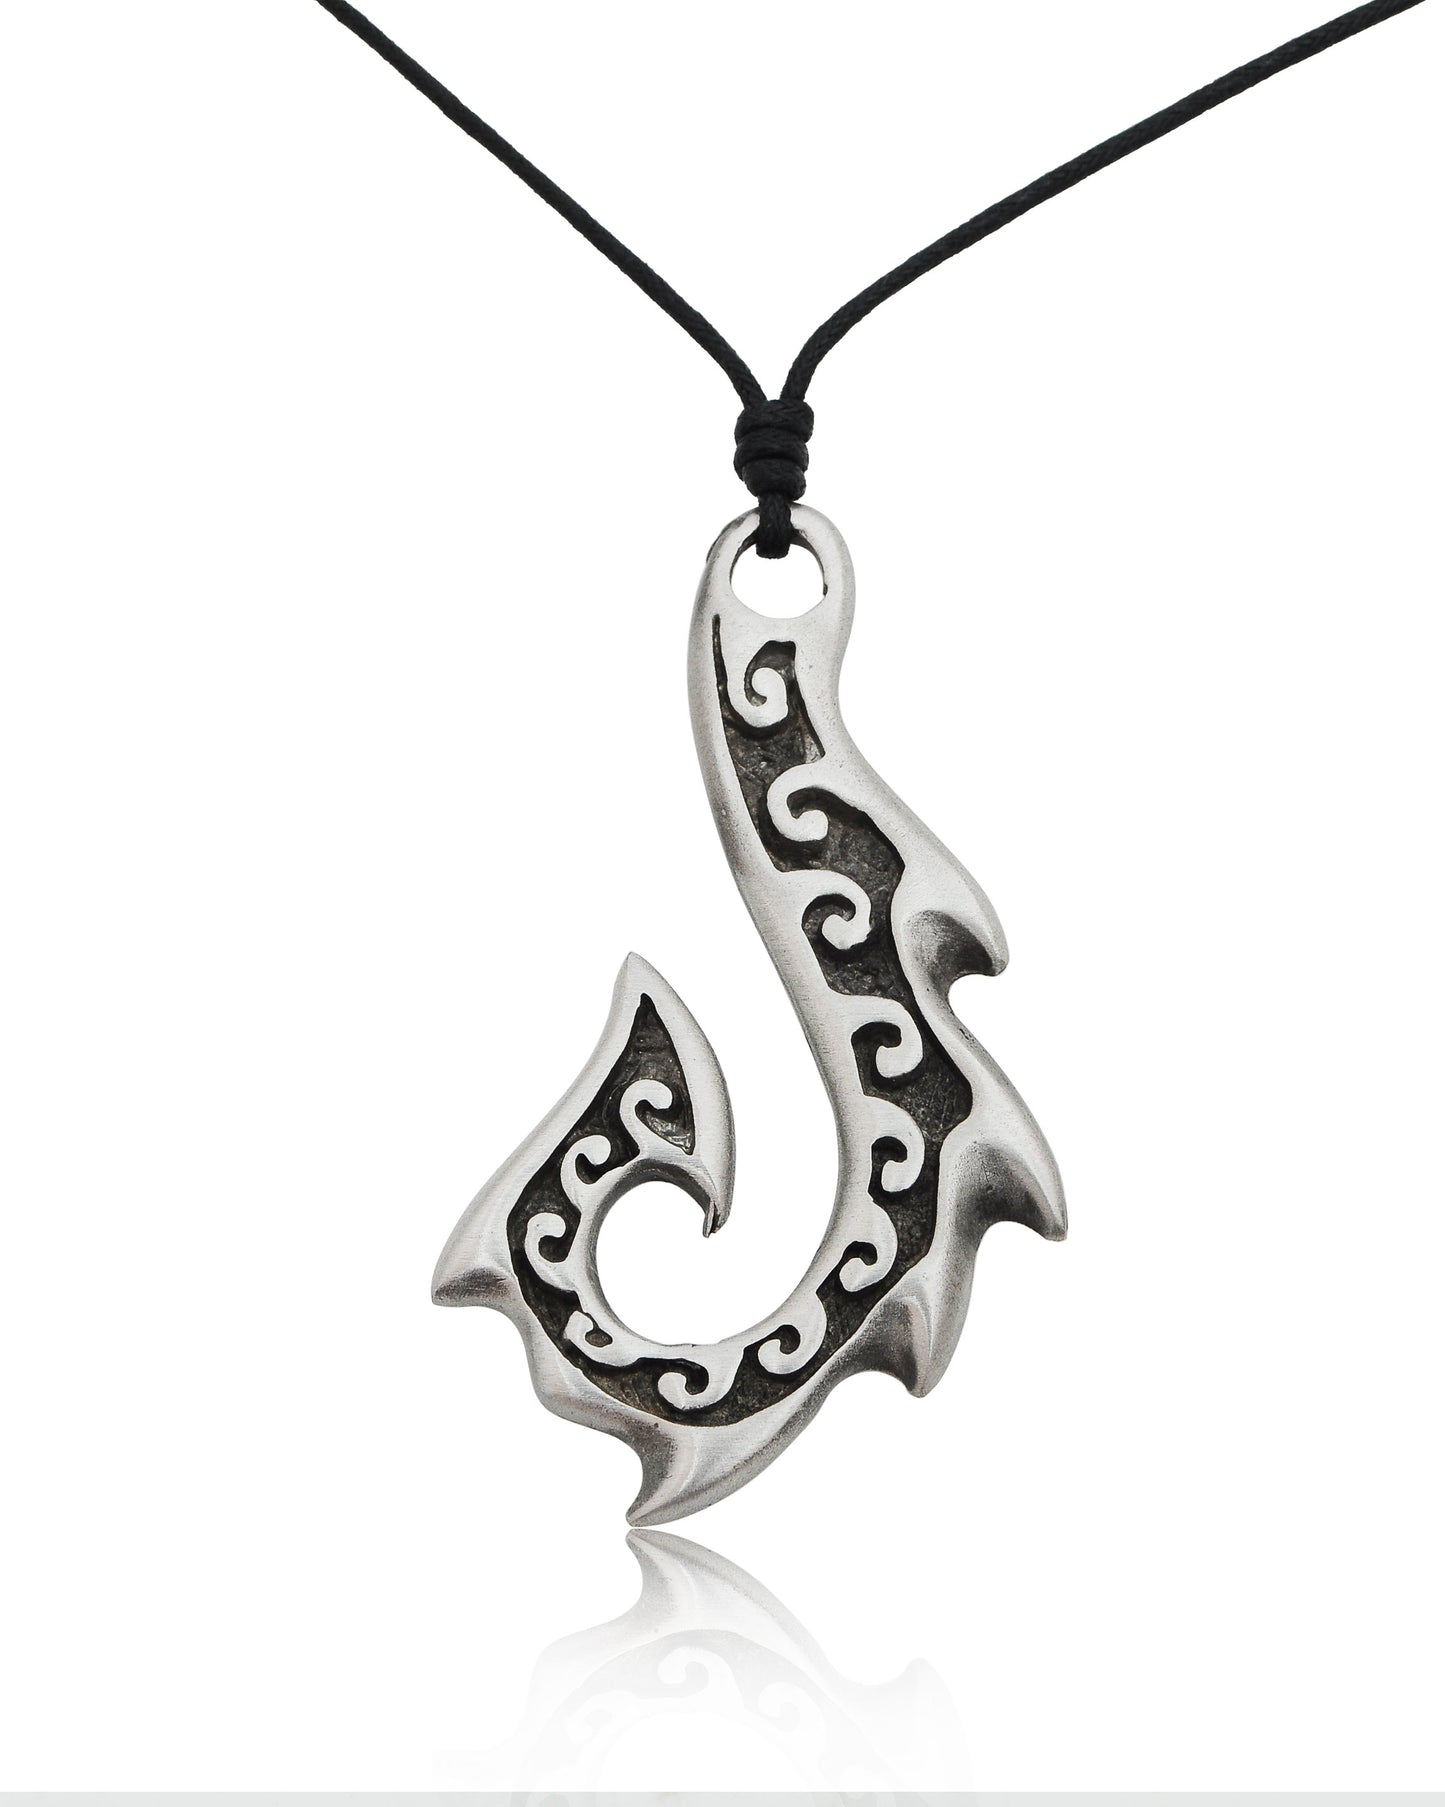 New Tribal Maori Fishing Hook Silver Pewter Charm Necklace Pendant Jewelry